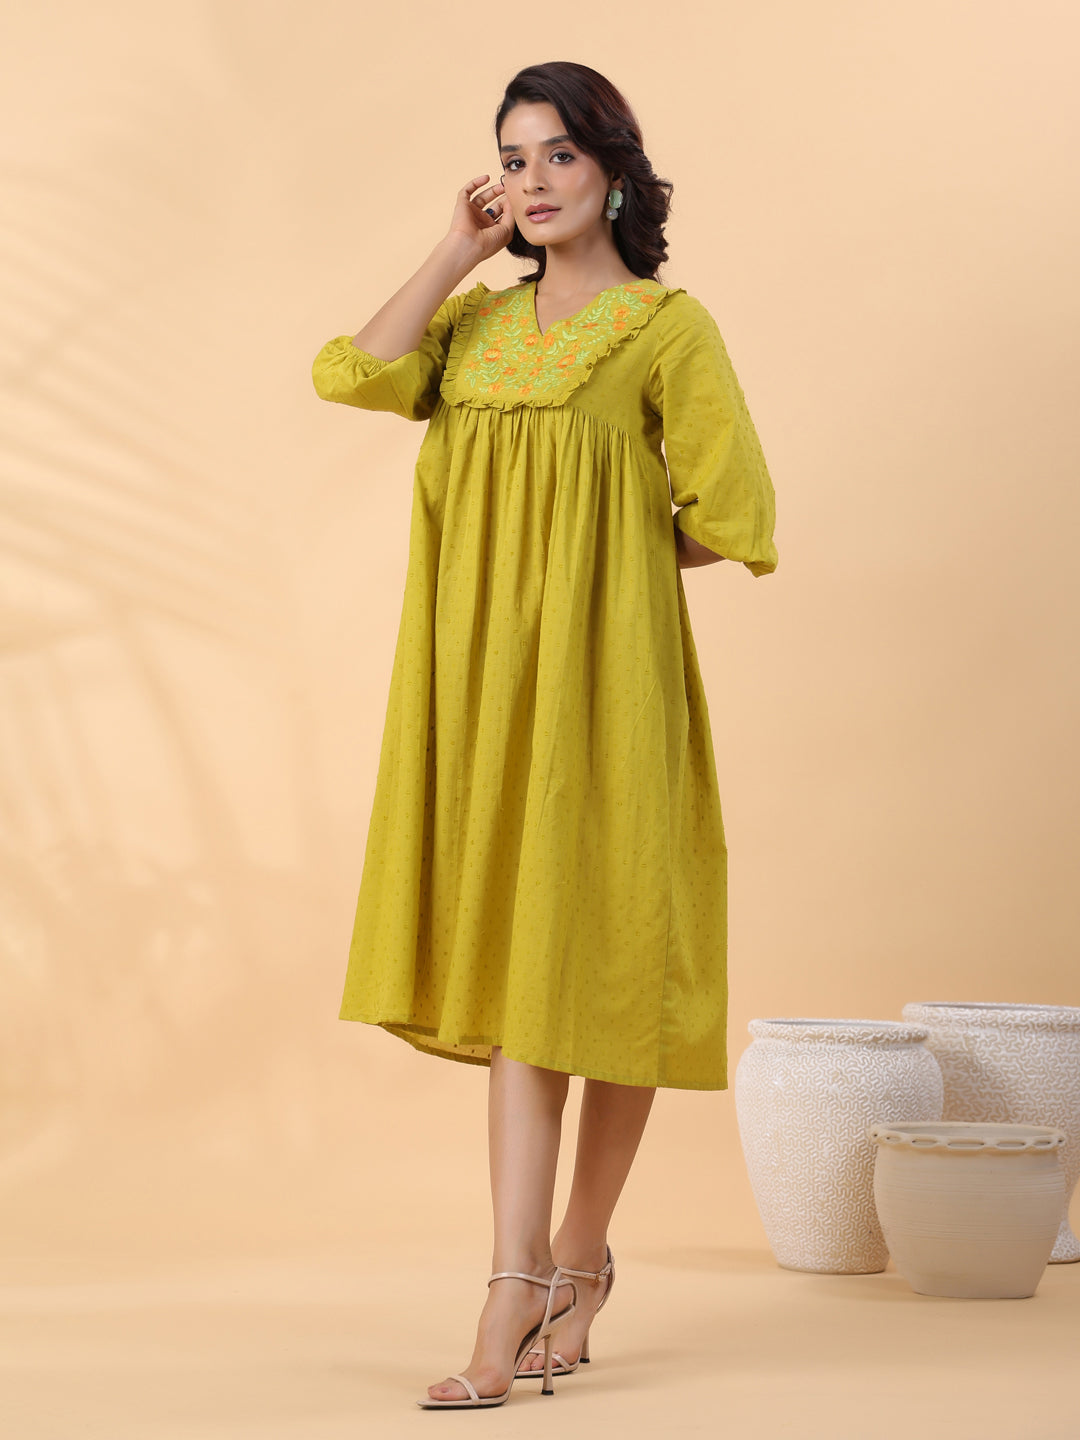 LIme Green Dobby Cotton Pleated Dress